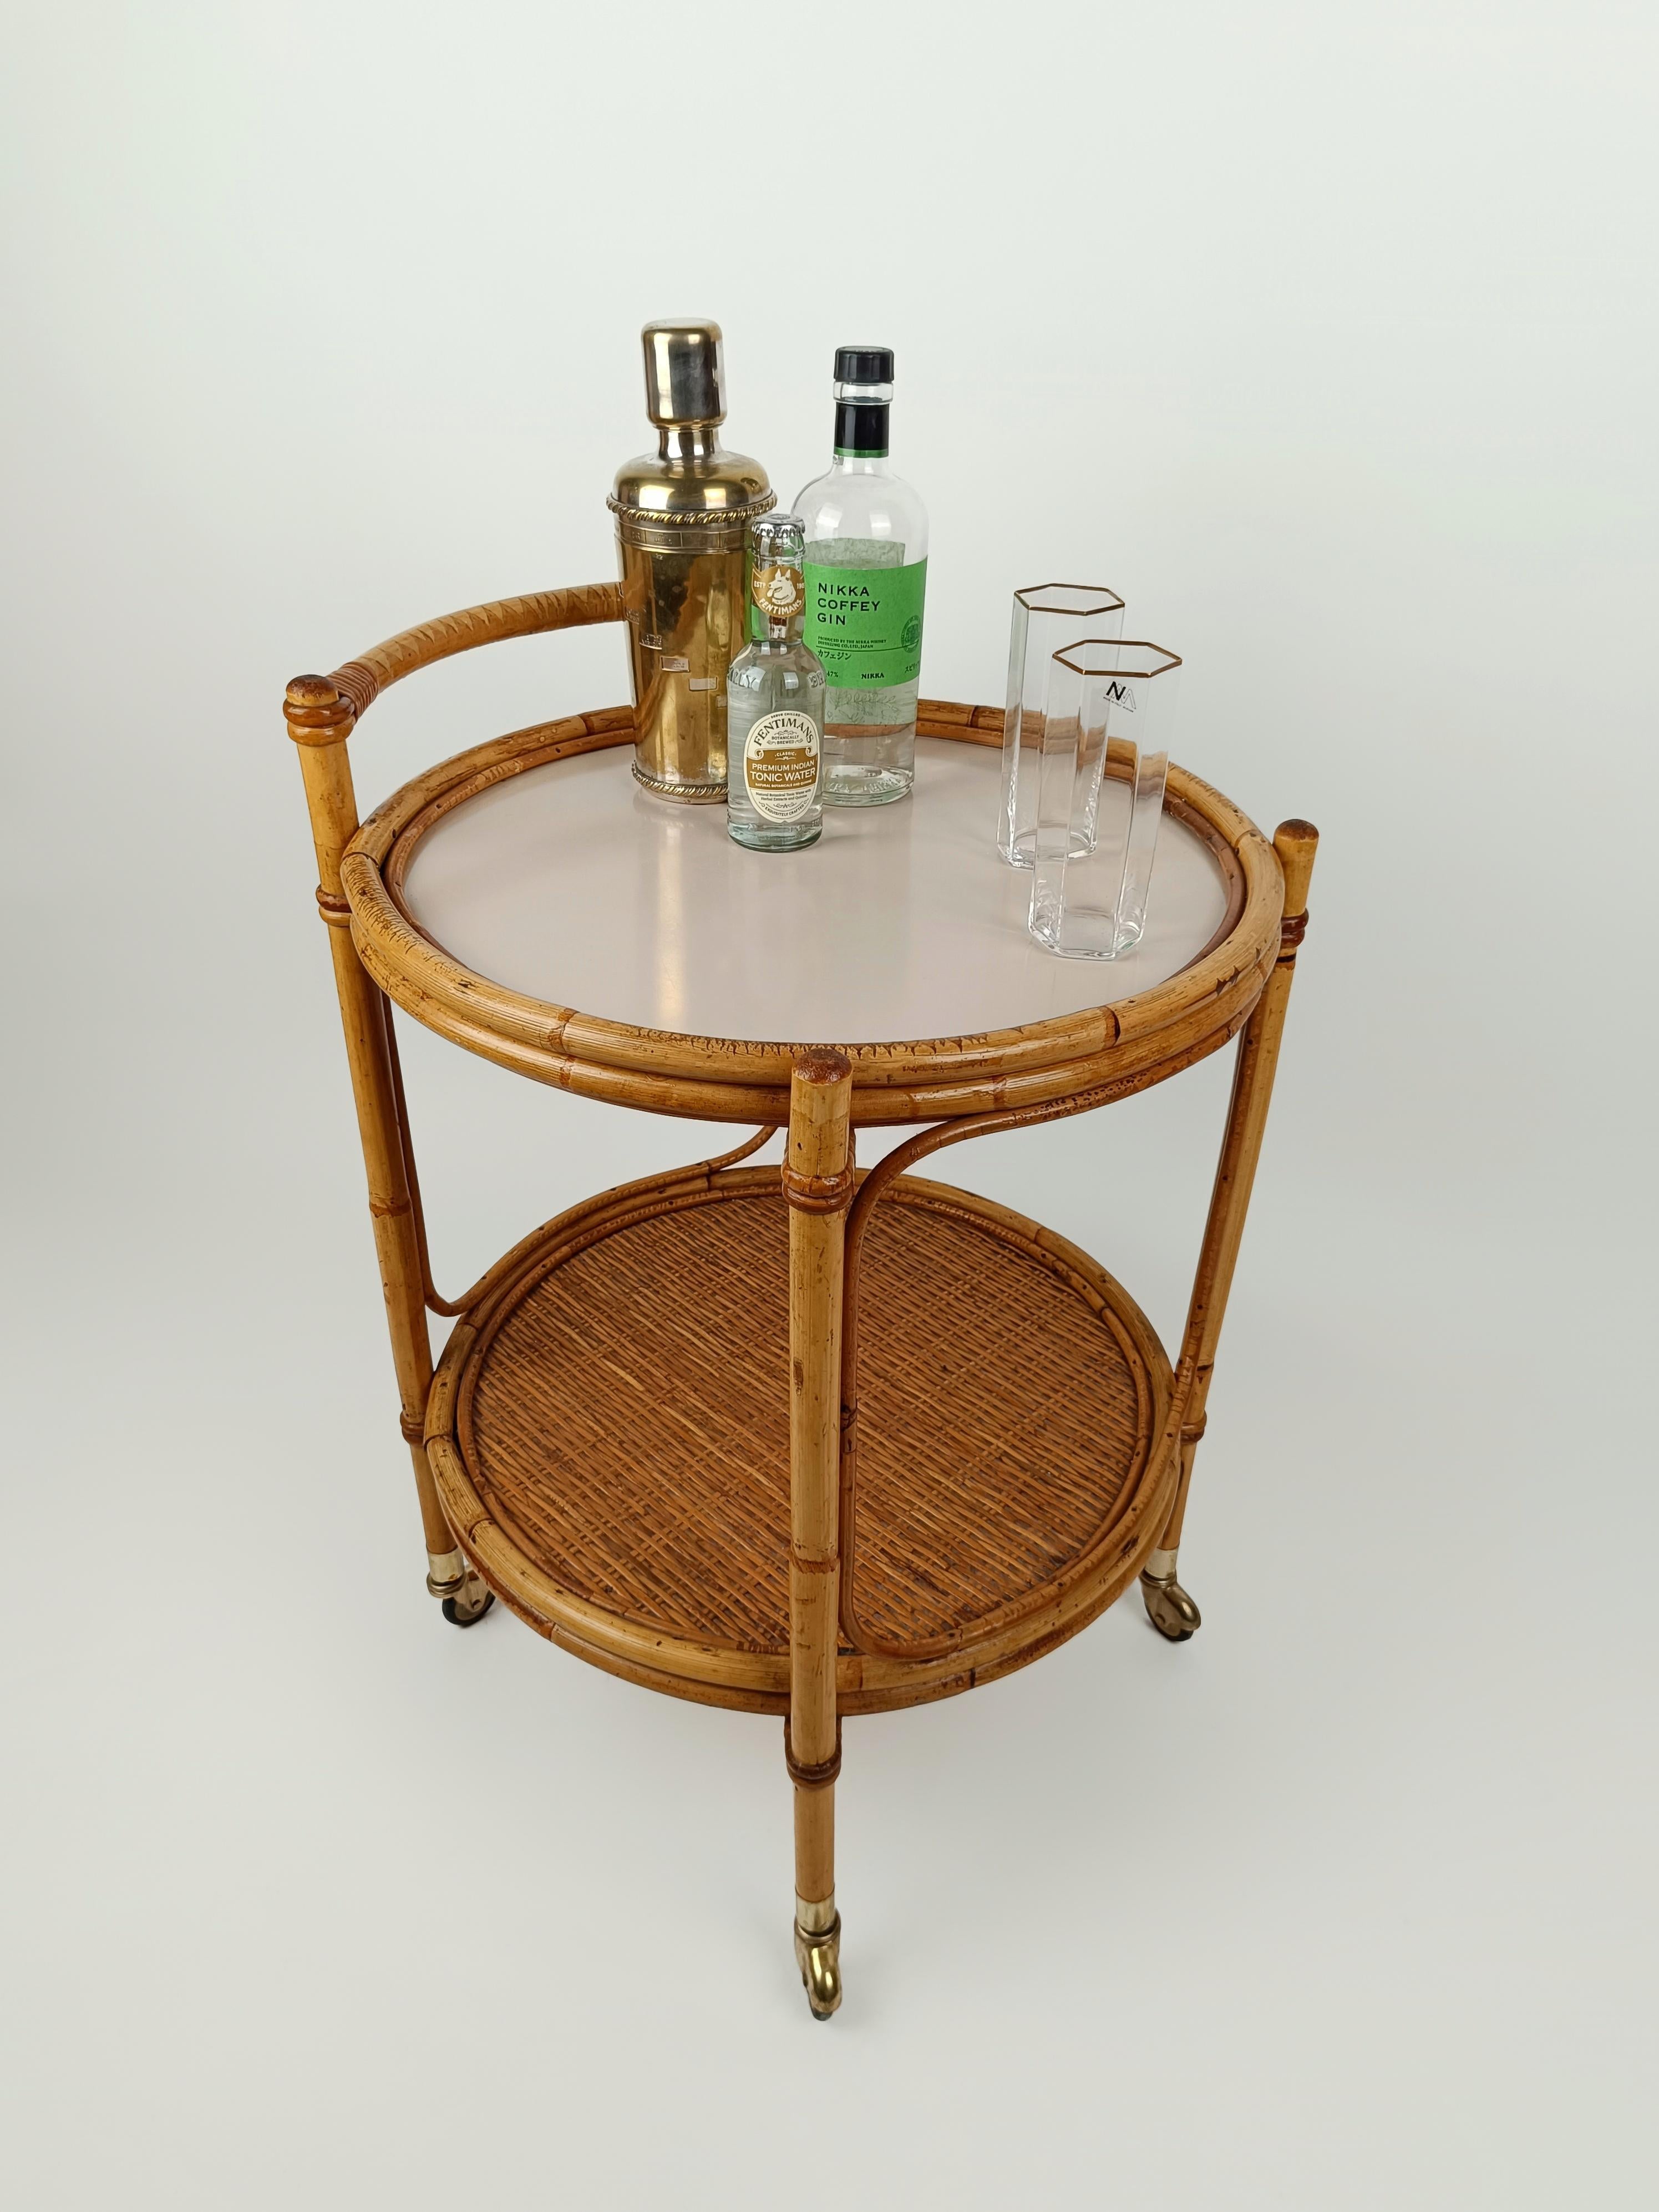 Mid 20th Century Round Serving Bar Cart Trolley in Bamboo & Rattan Italy, 1960s For Sale 15